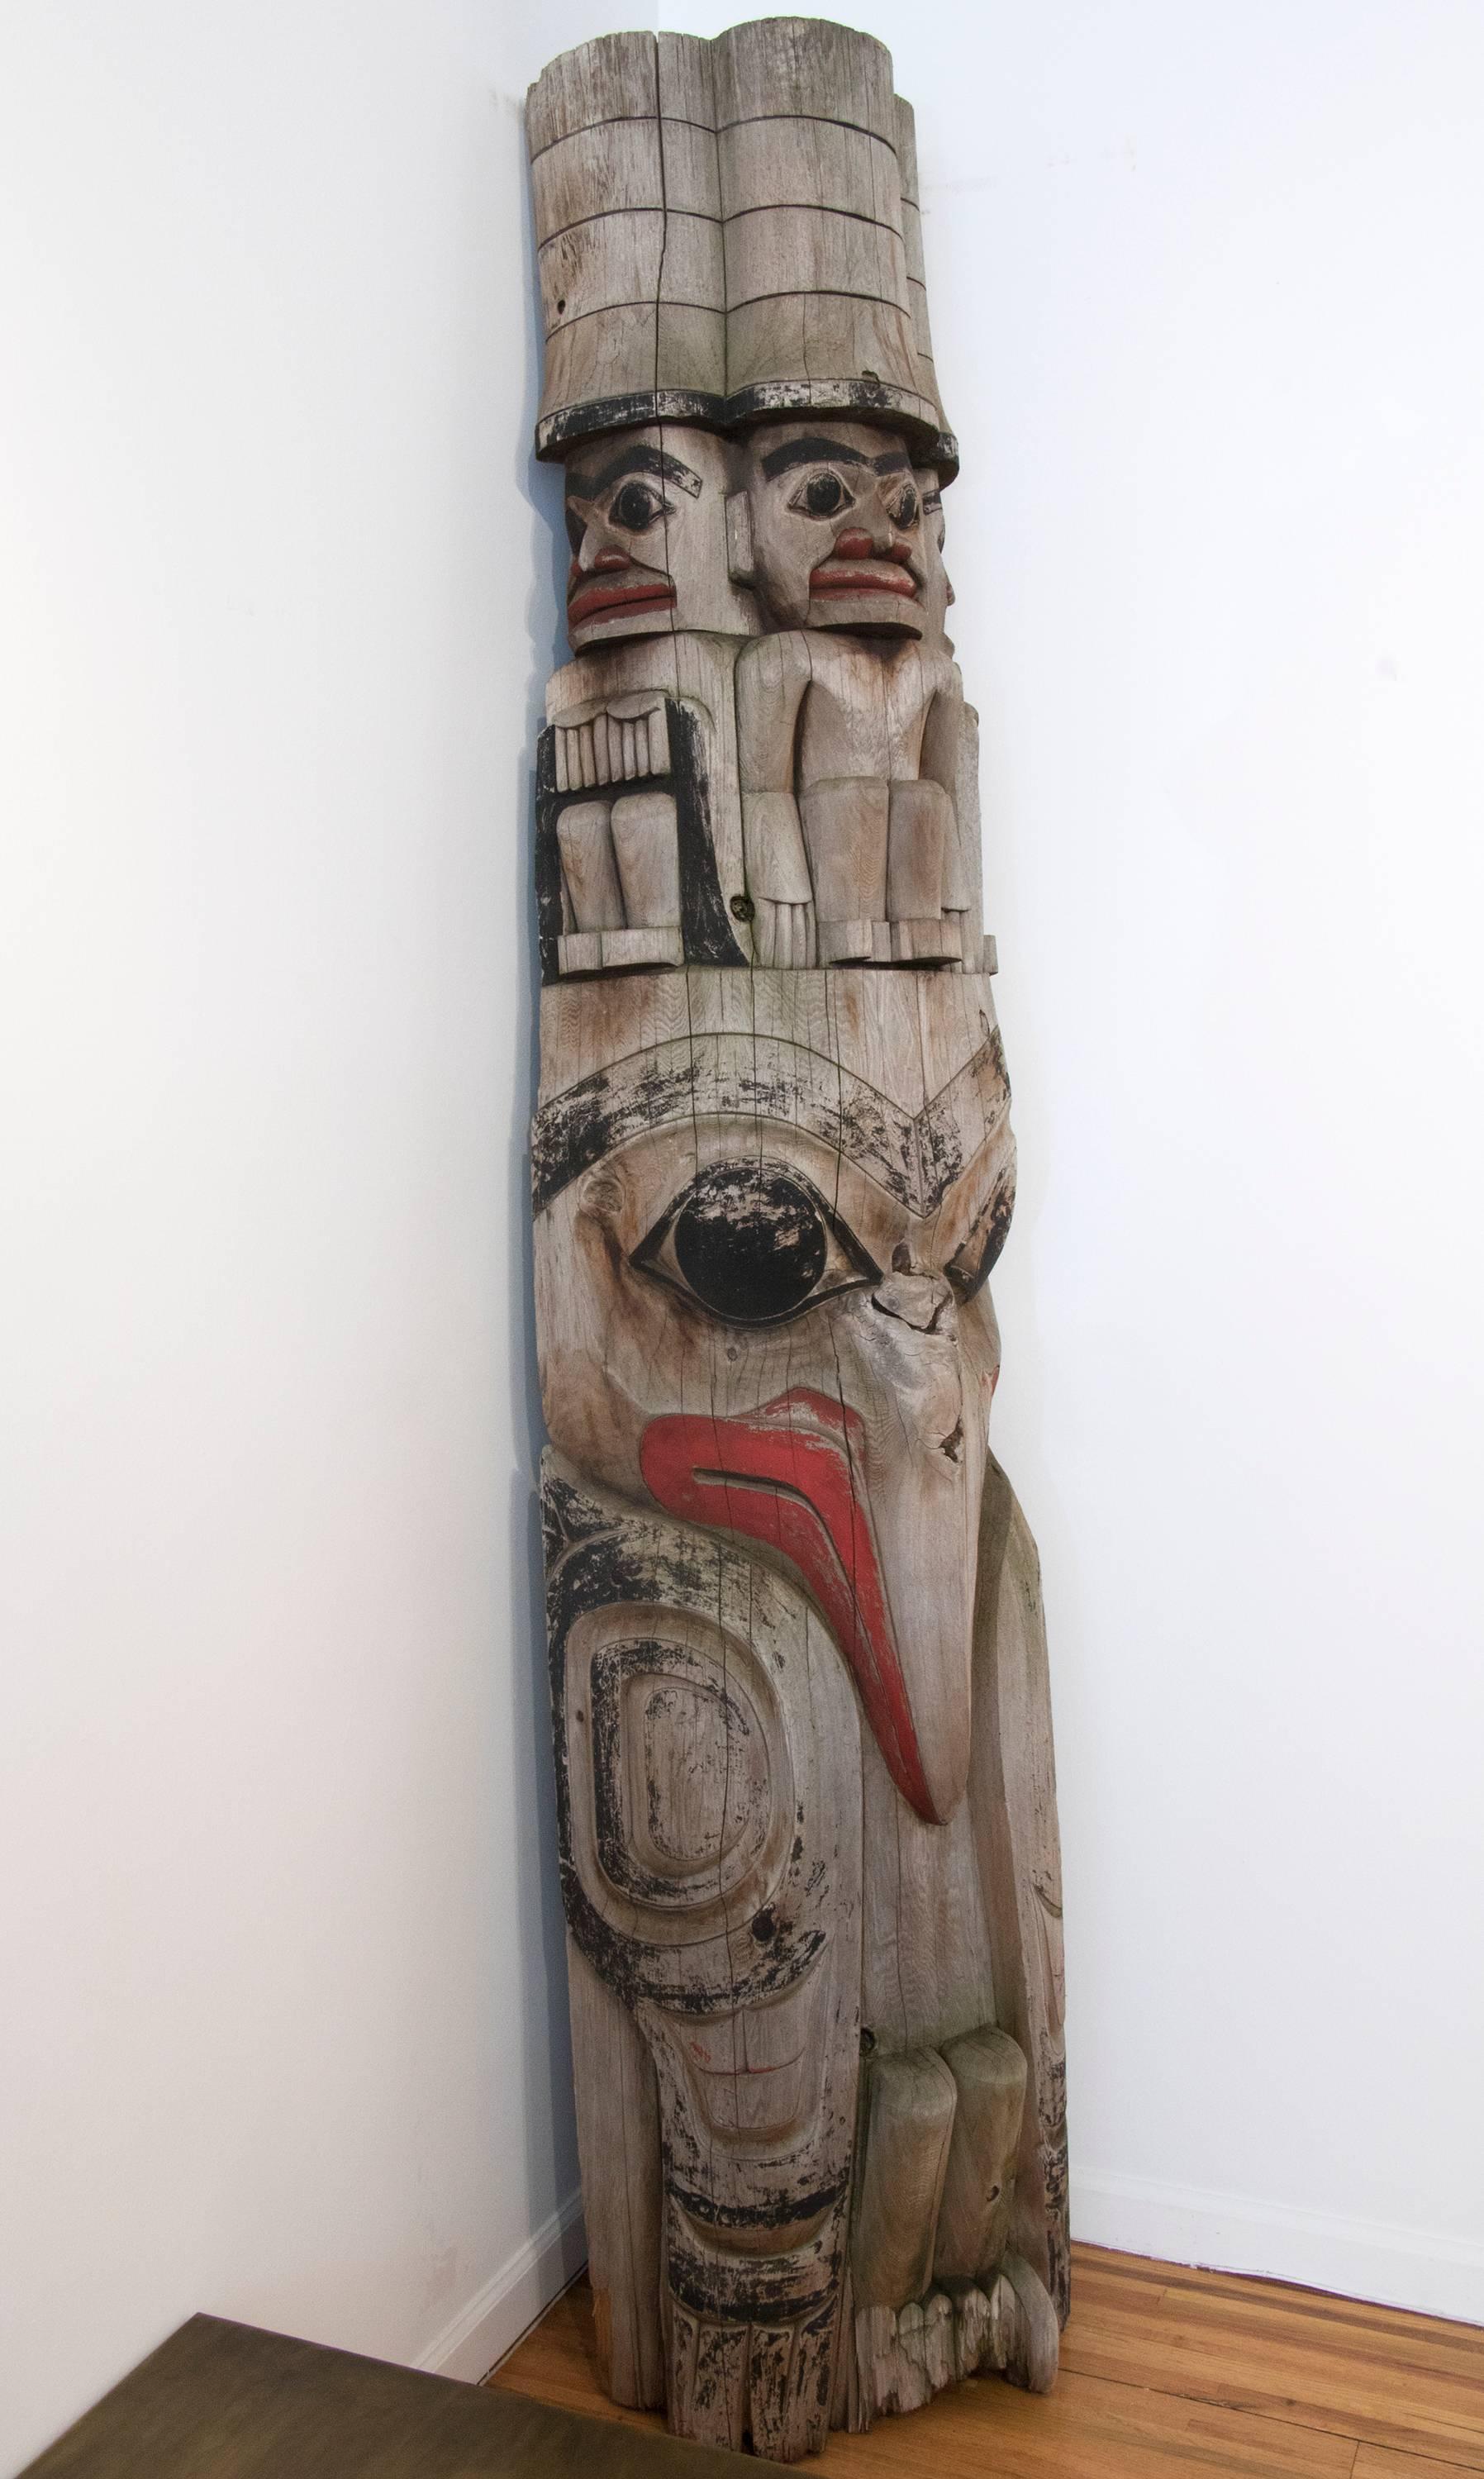 Likely a segment from a full TOTEM pole. It stands over 7 1/2 feet tall and is 20 inches wide and 16 deep. It has been outside and has a lovely weathered patina.

Expertly carved and painted by a Tlinget carver. The Tlingit peoples are indigenous